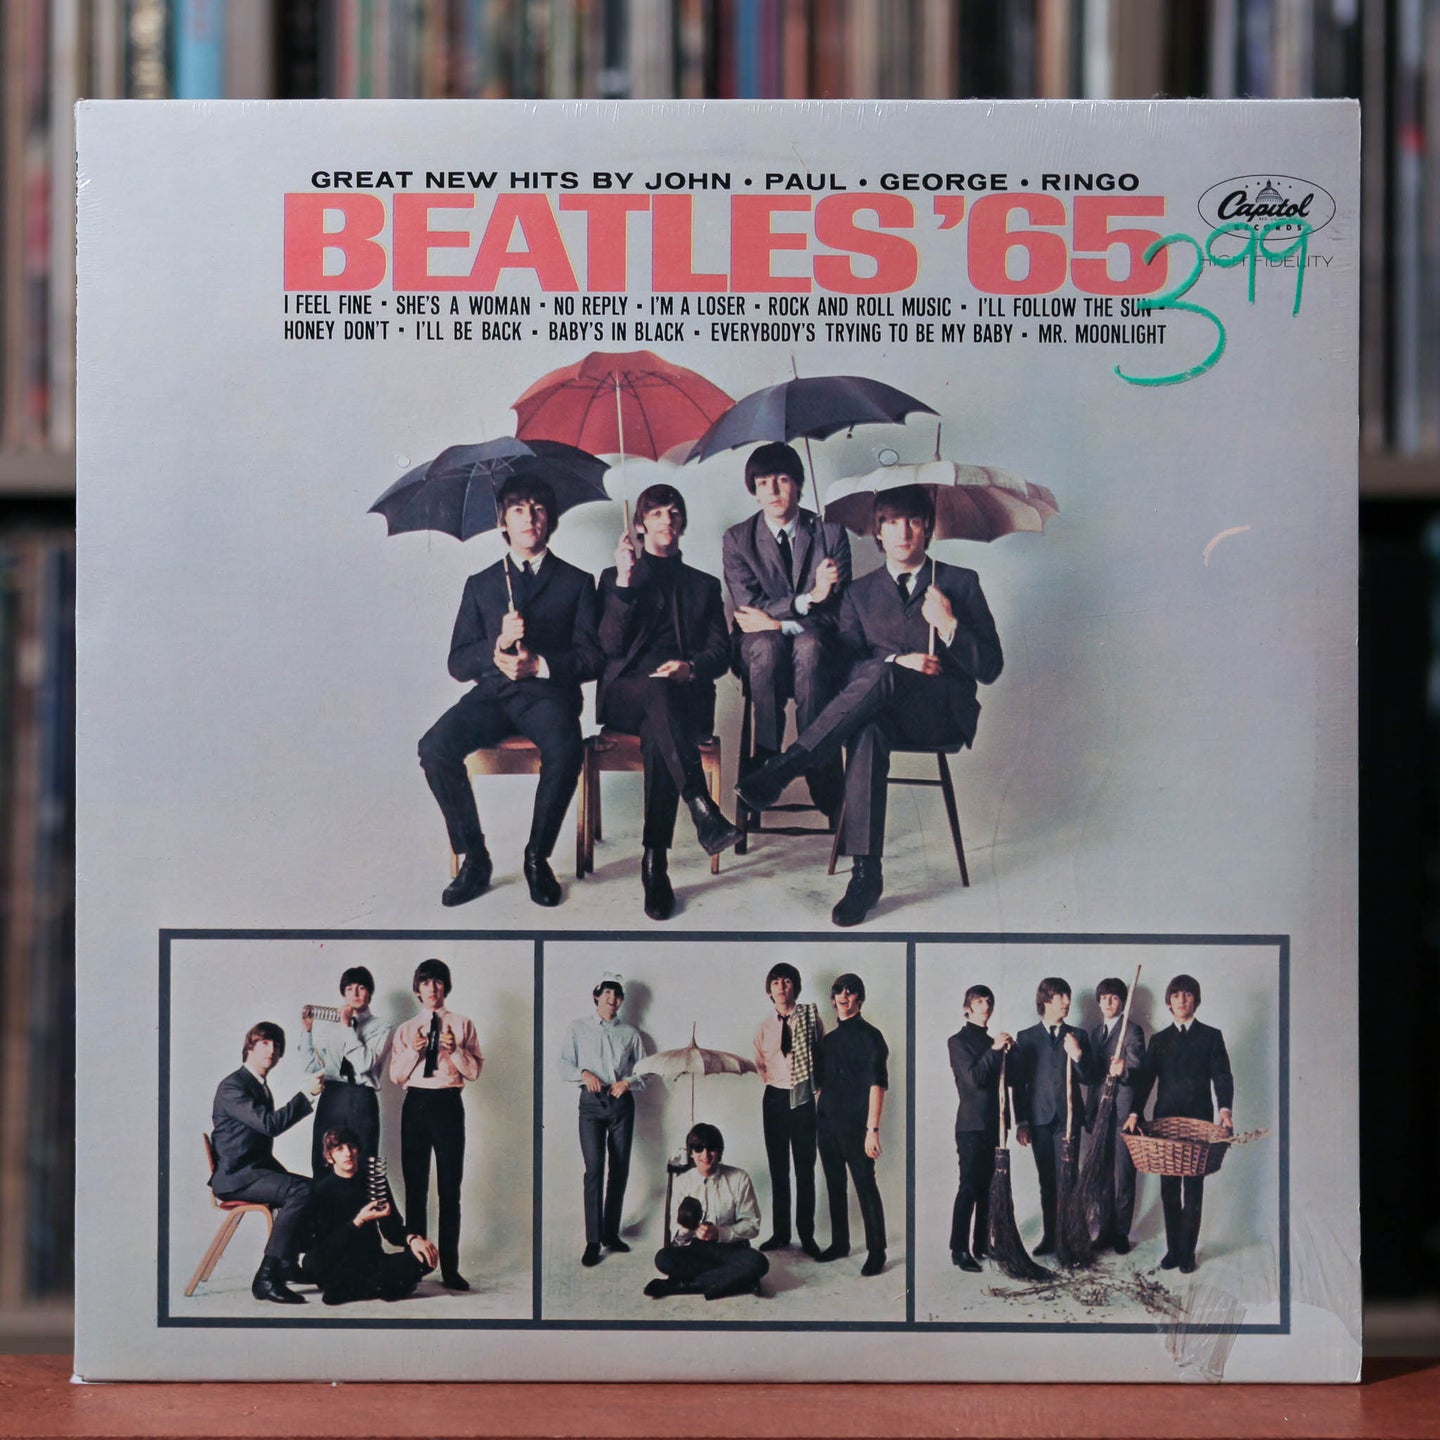 The Beatles - Beatles '65 - Canada Import - 1970's Capitol, SEALED